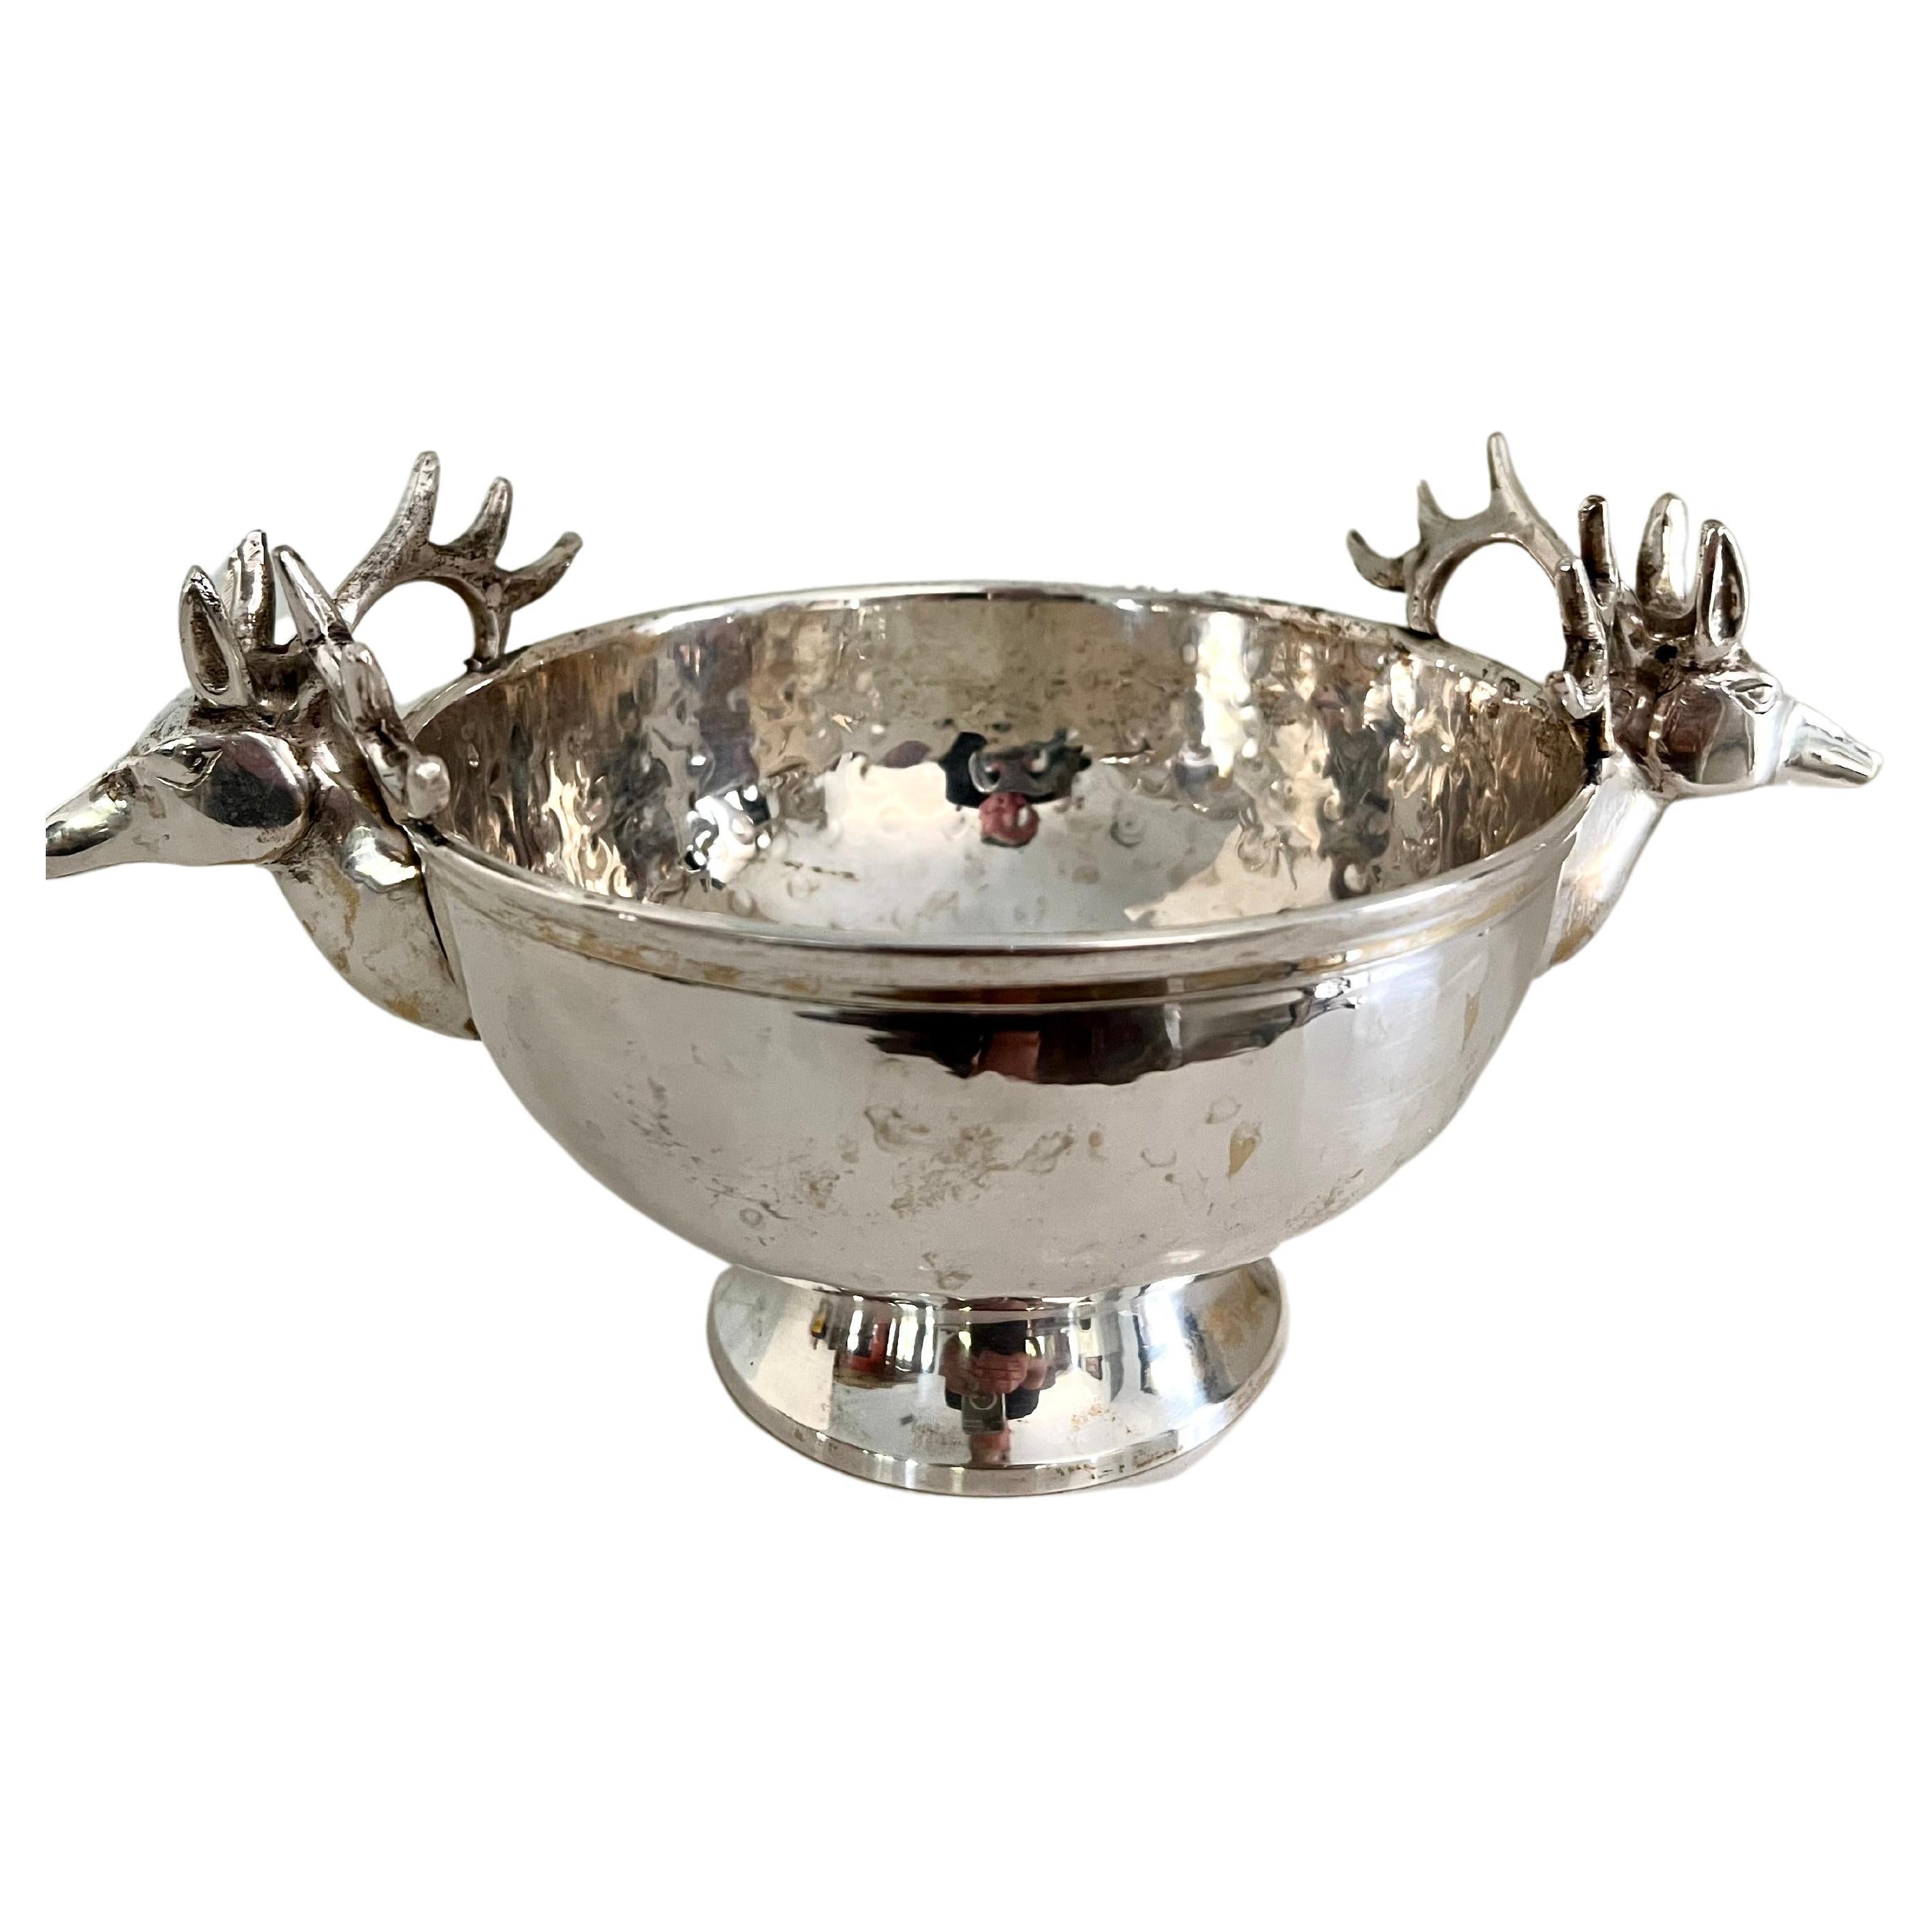 A lovely silver plate hammered bowl with Stags on either side. a compliment as a serving piece, especially for the holidays or in a cabin, or rustic setting. also works well as a floral vase or to throw ones keys into. multi purpose, solid and very